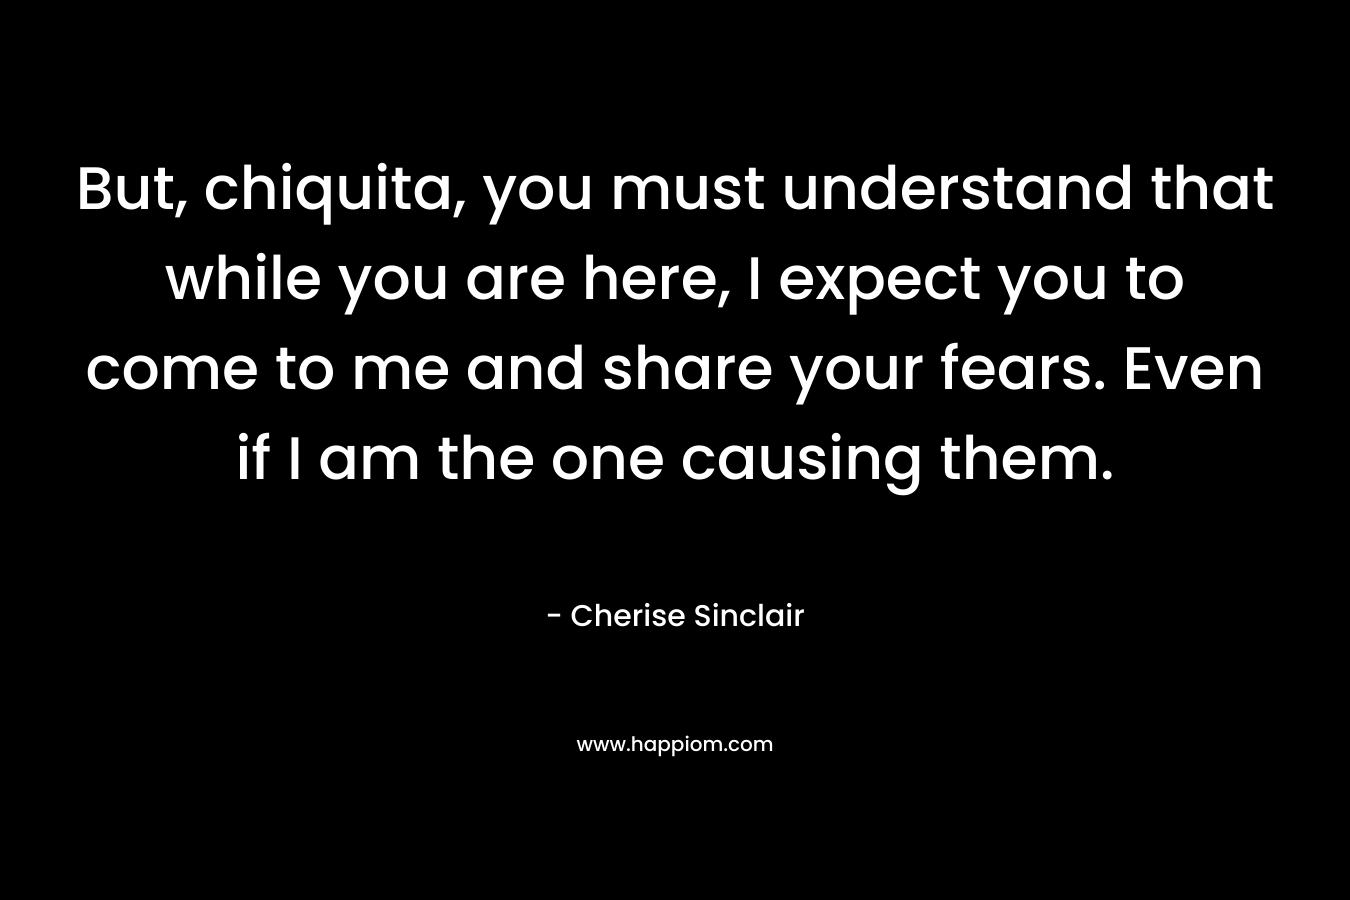 But, chiquita, you must understand that while you are here, I expect you to come to me and share your fears. Even if I am the one causing them. – Cherise Sinclair